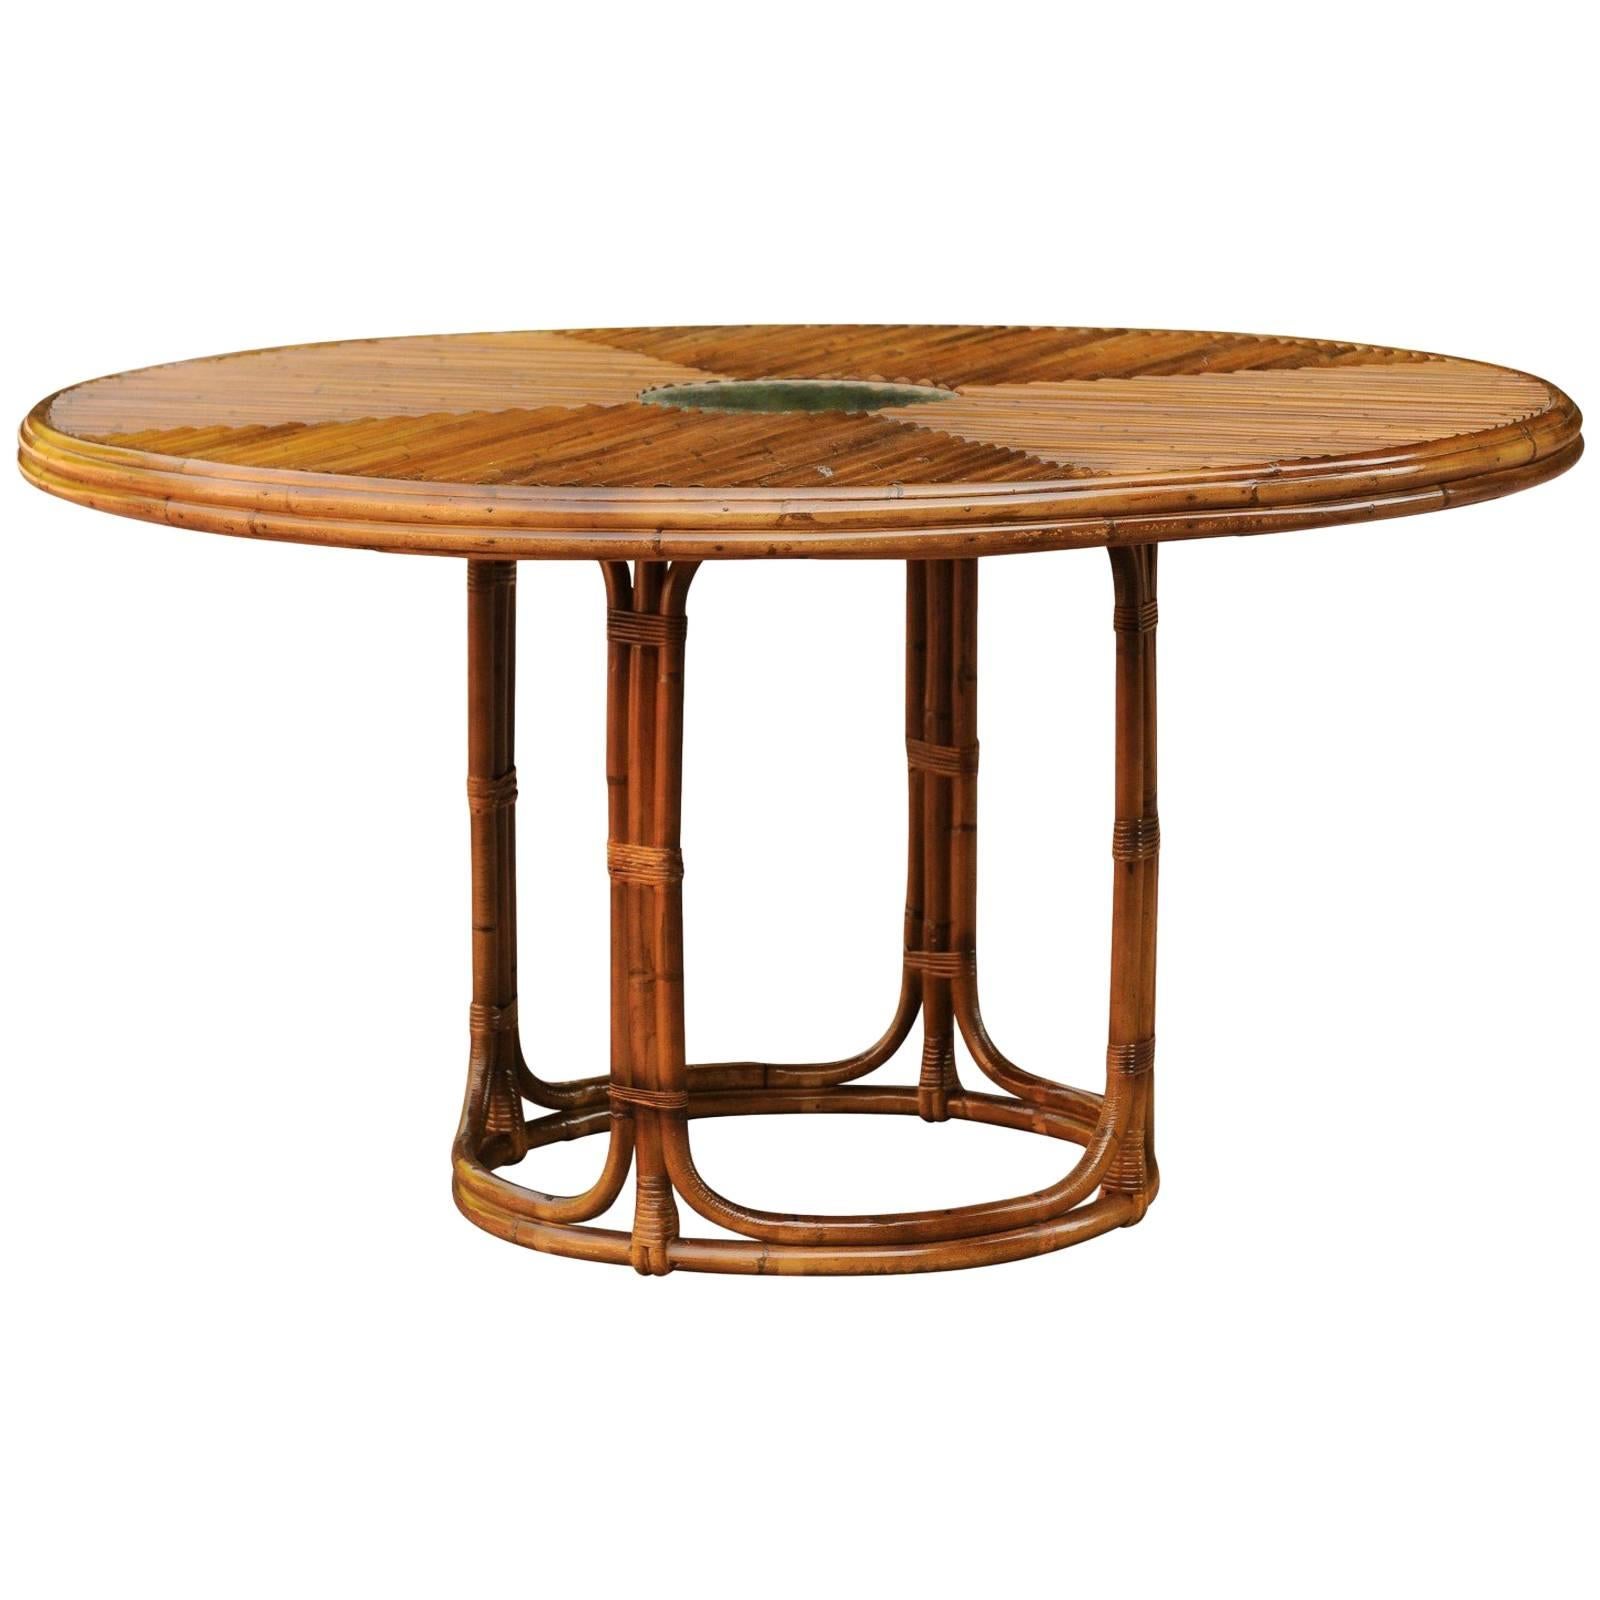 Breathtaking Vintage Bamboo and Rattan Center or Dining Table, circa 1975